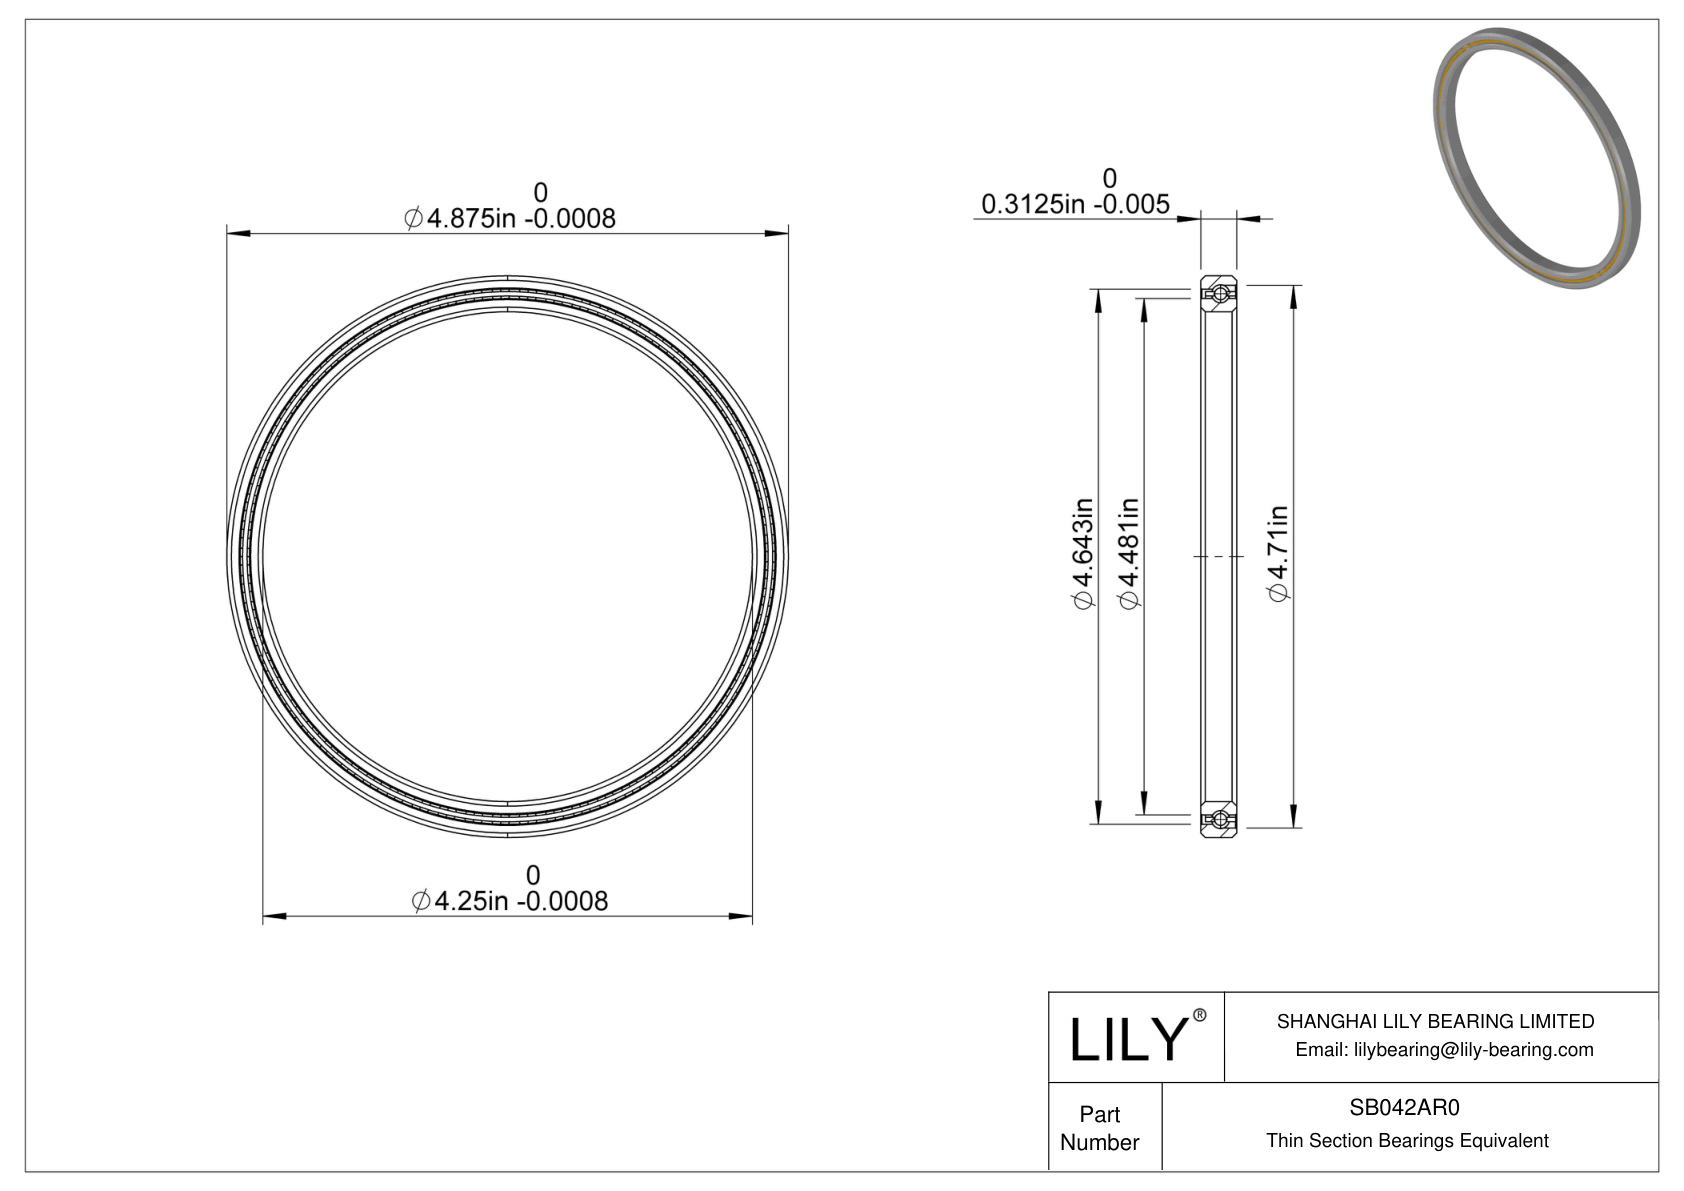 SB042AR0 Constant Section (CS) Bearings cad drawing